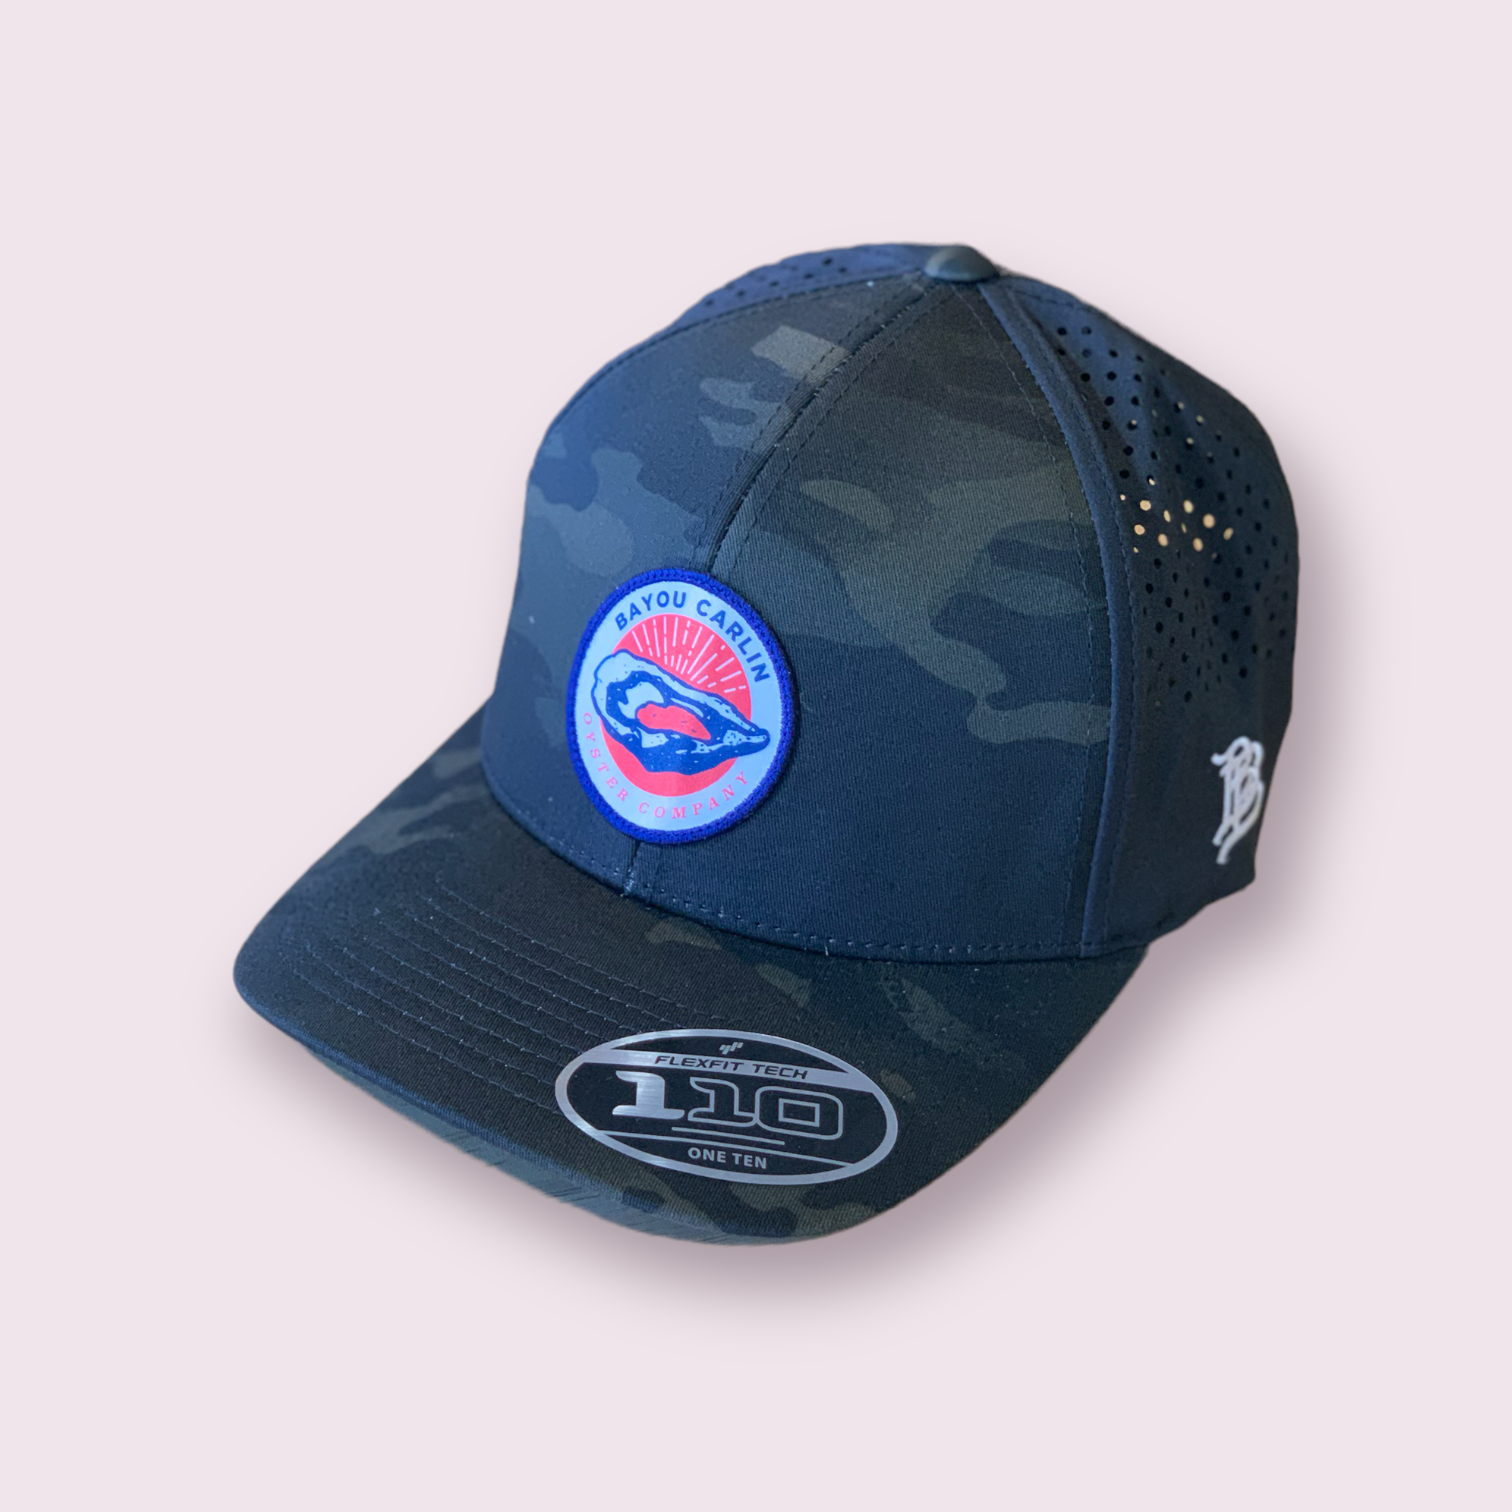 Sublimated Hat Oyster - Trucker Patch Curved Carlin - Black Bayou Performance – Logo MultiCa